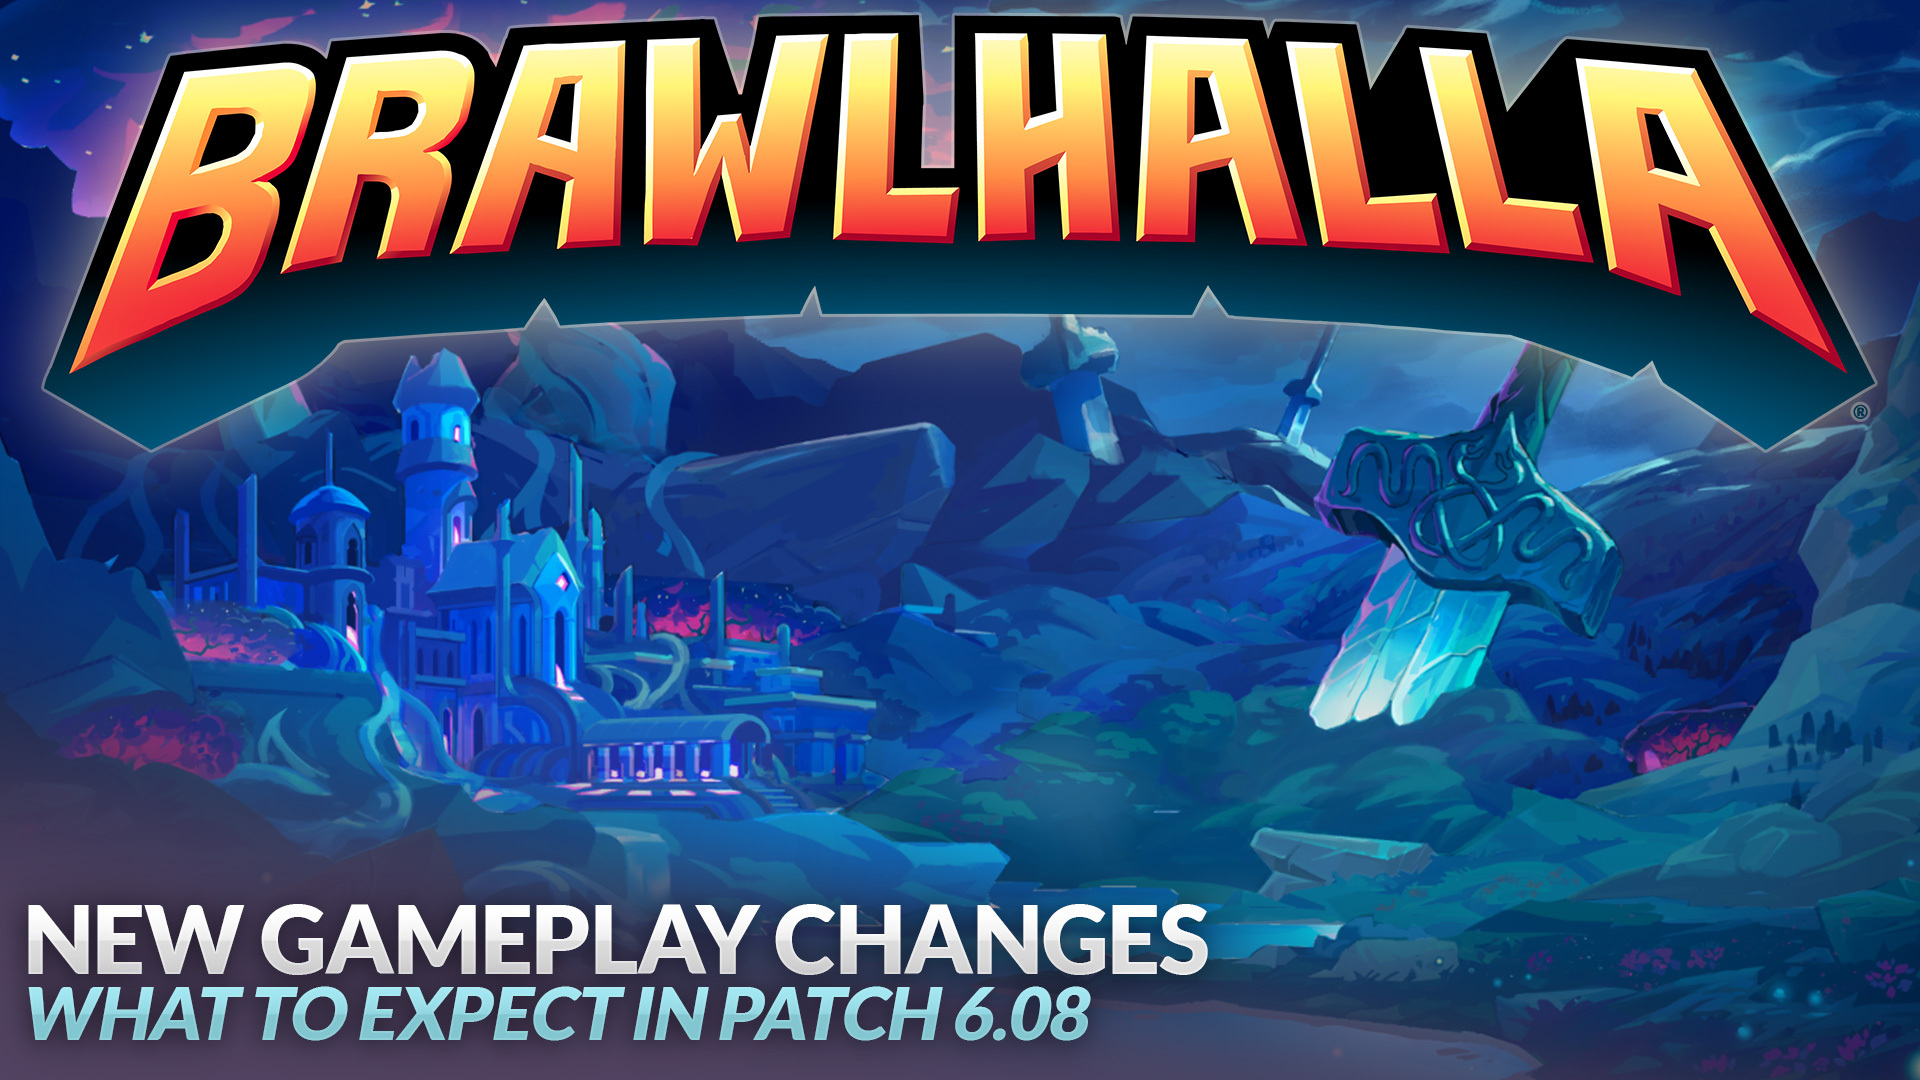 New Gameplay Changes Coming in Patch 6.08!